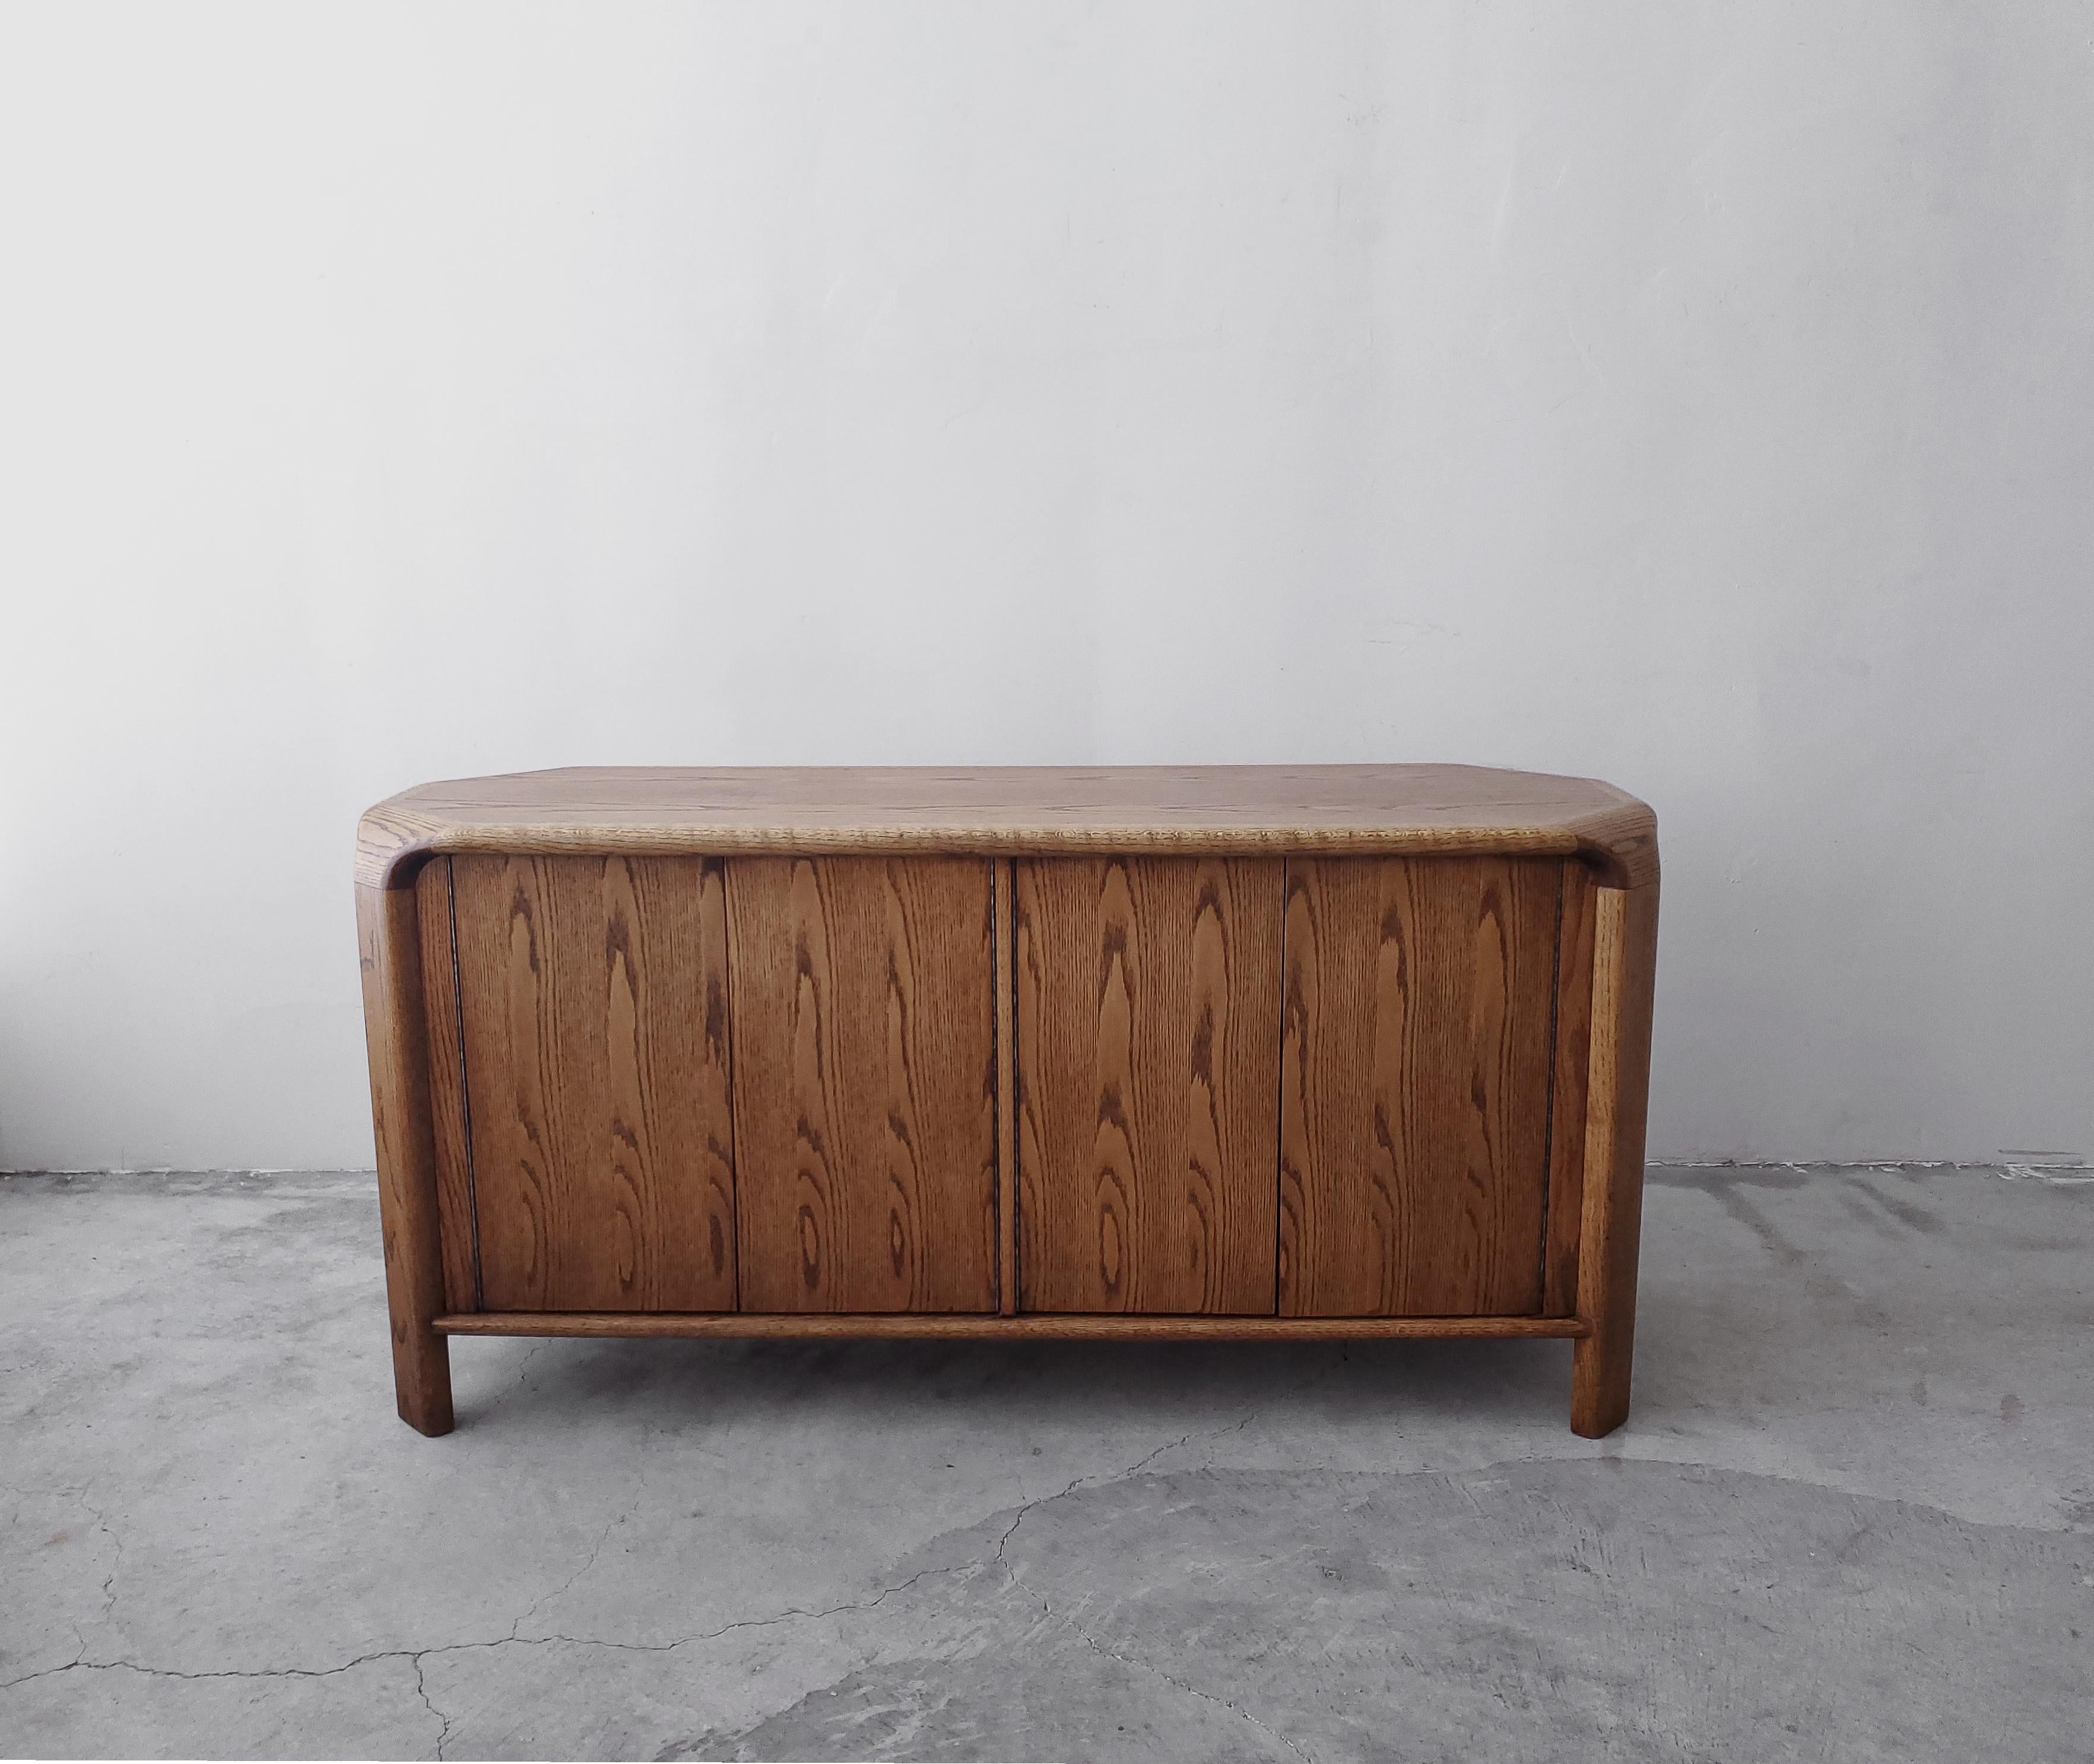 I love the simplicity of oak and this beautiful Lou Hodges piece is no exception. The cabinet is constructed out of beautifully grained oak, the rounded edge details give this piece quite a bit of visual interest. And the finished back allows it to